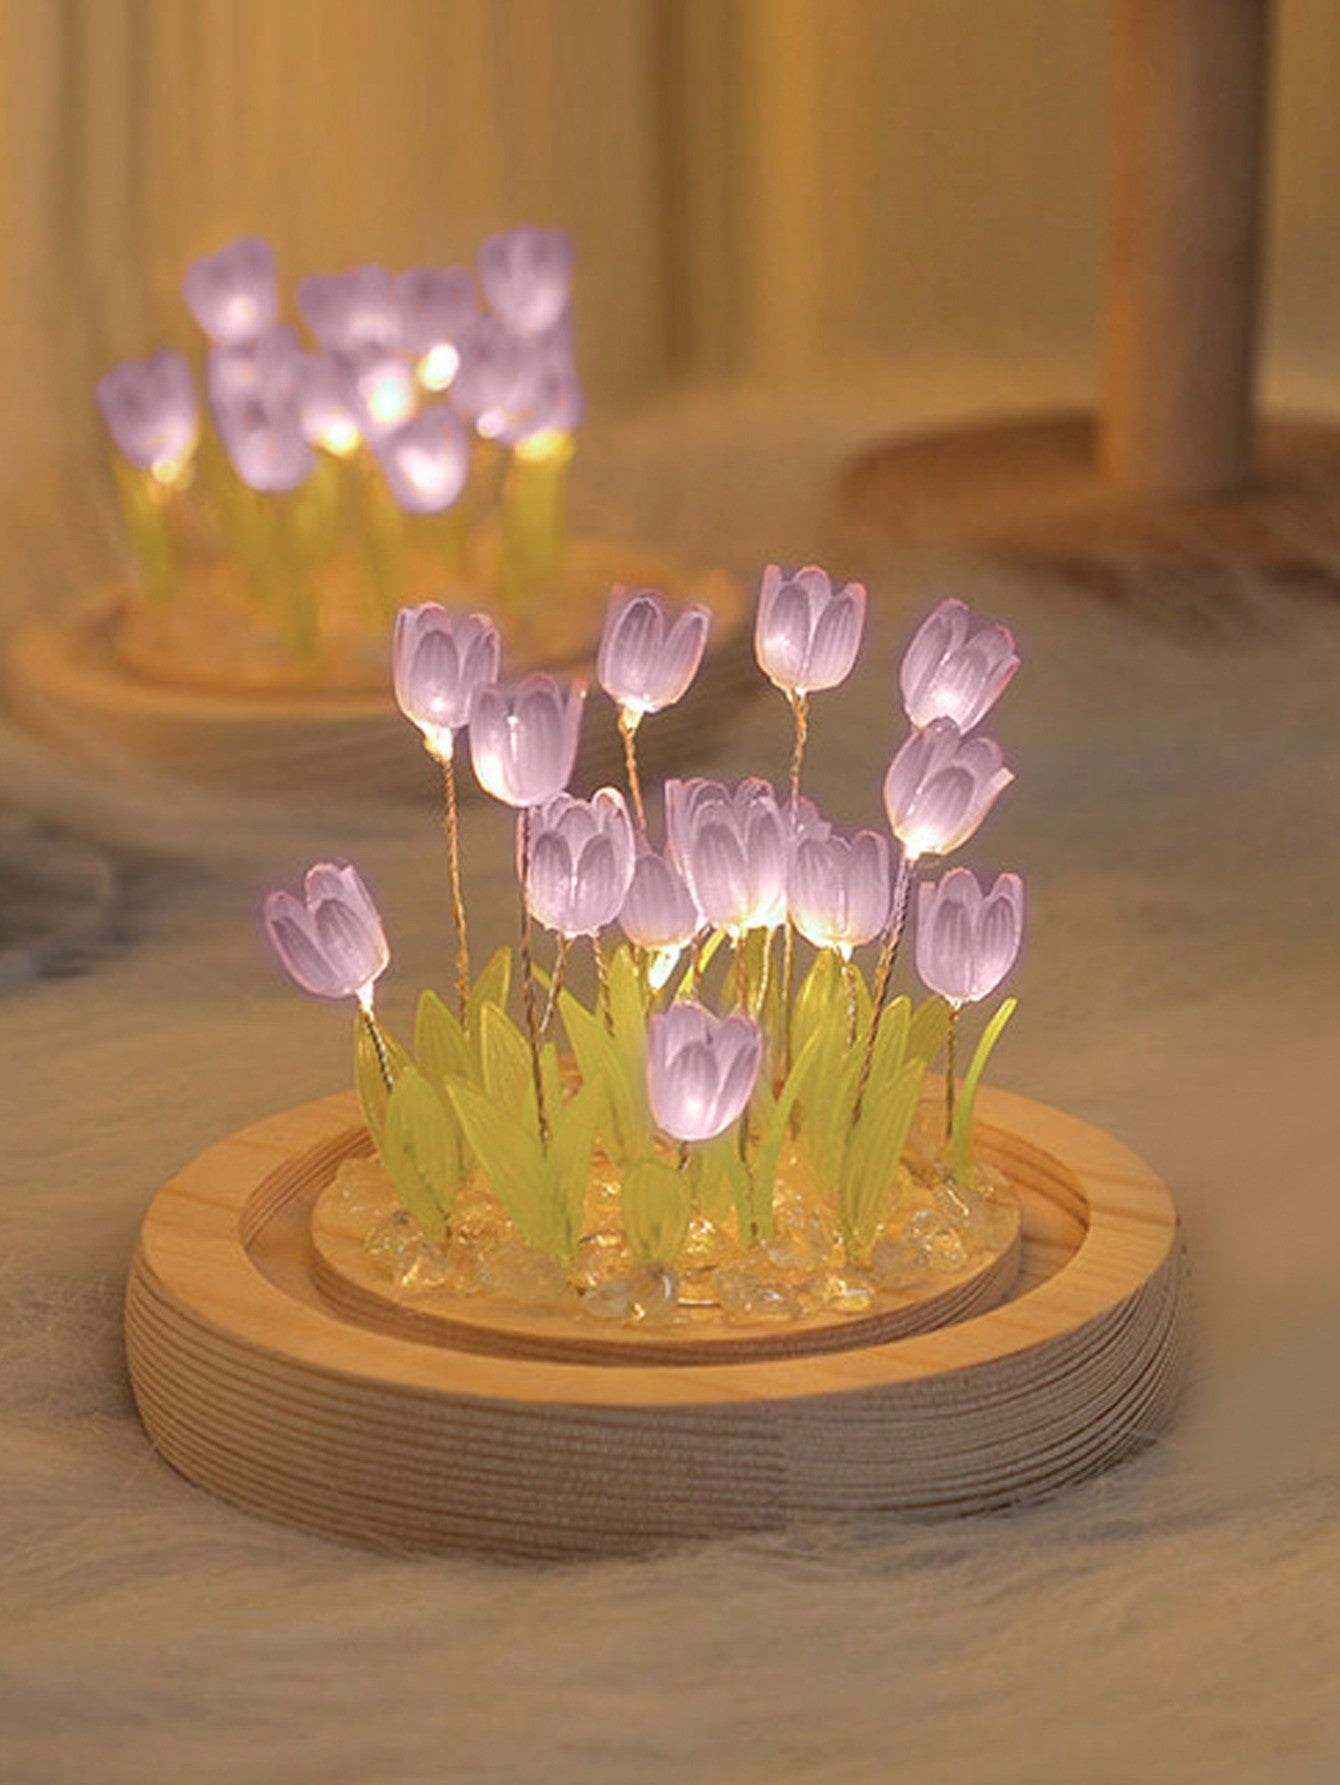 Creative Diy Simulation Flower Tulip Dome Table Lamp for Kids Gift,Pure Handmade Table Lamps for Room and Bedroom Decoration, Atmosphere Lights, Small Desk Ornaments Birthday Gifts